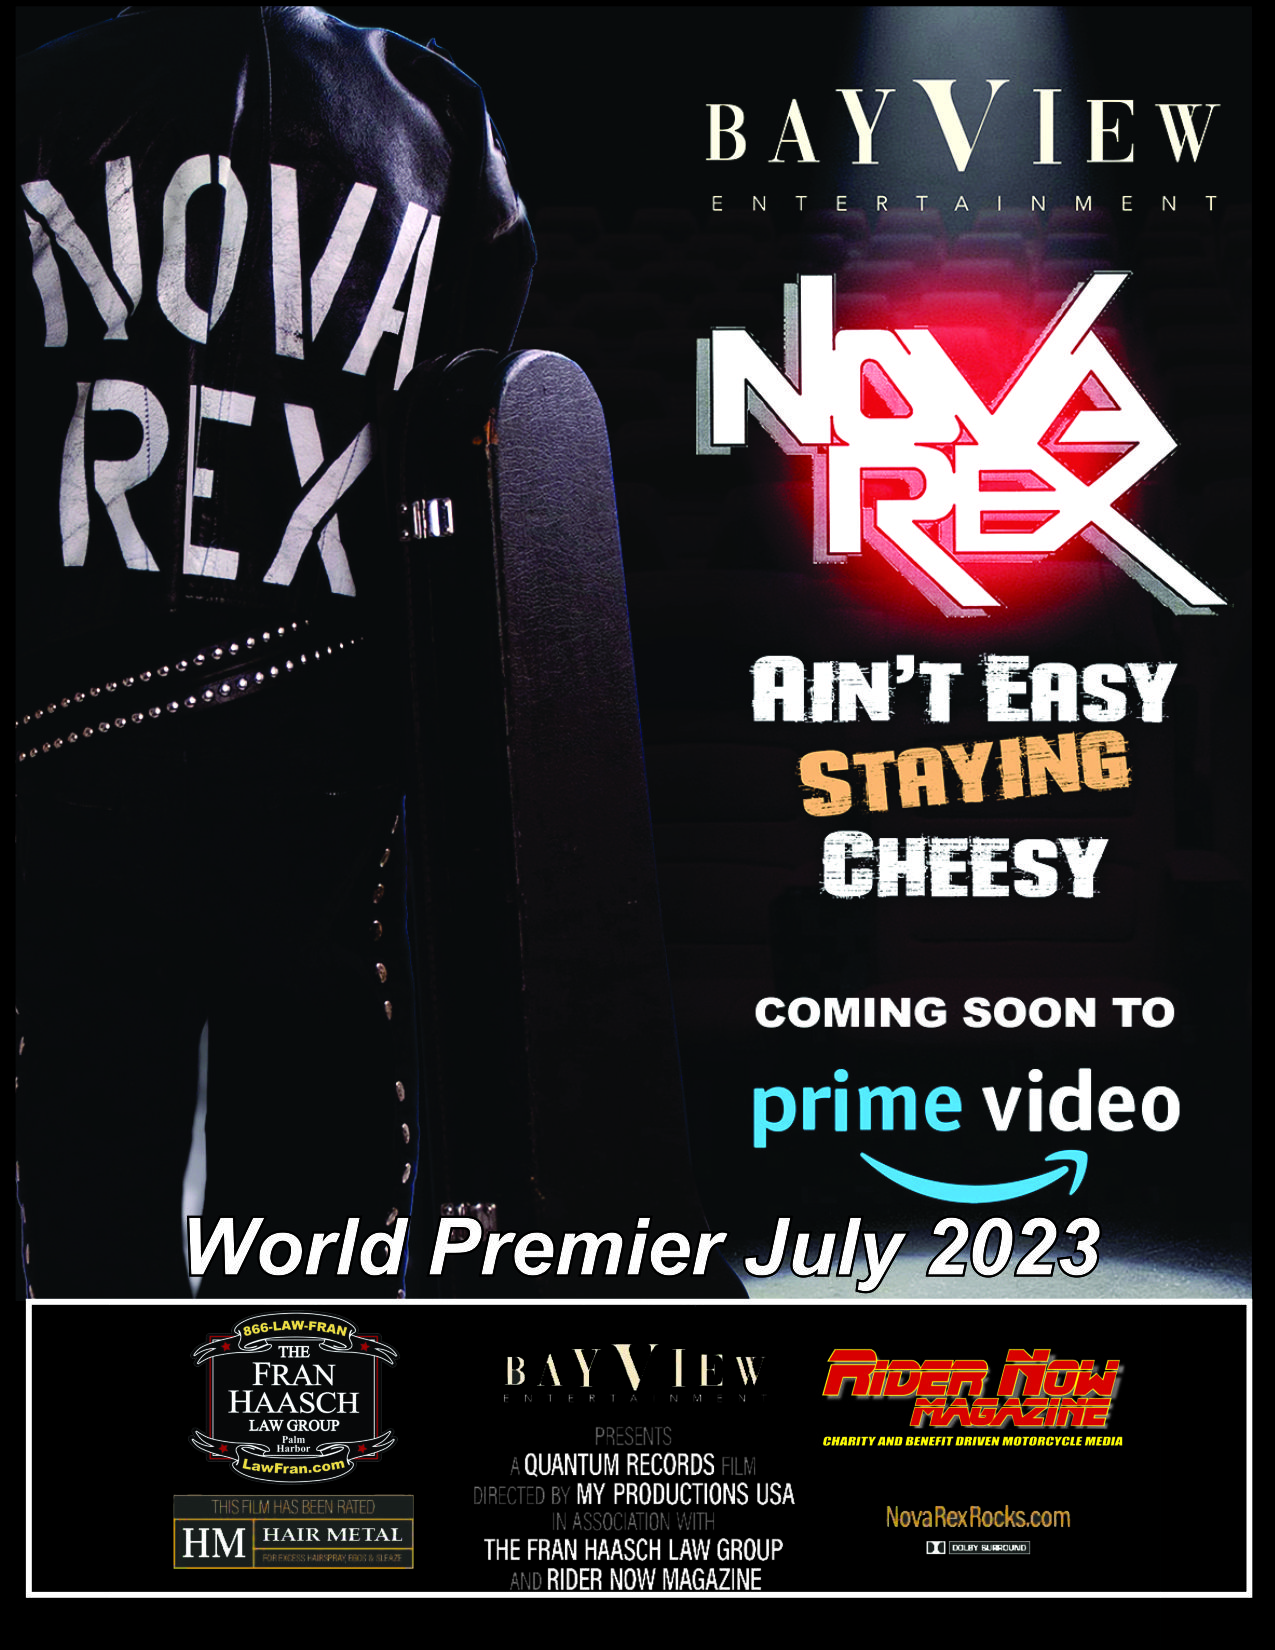 Nova Rex It Ain't Easy Staying Cheesy Documentary Streaming on PRIME Video